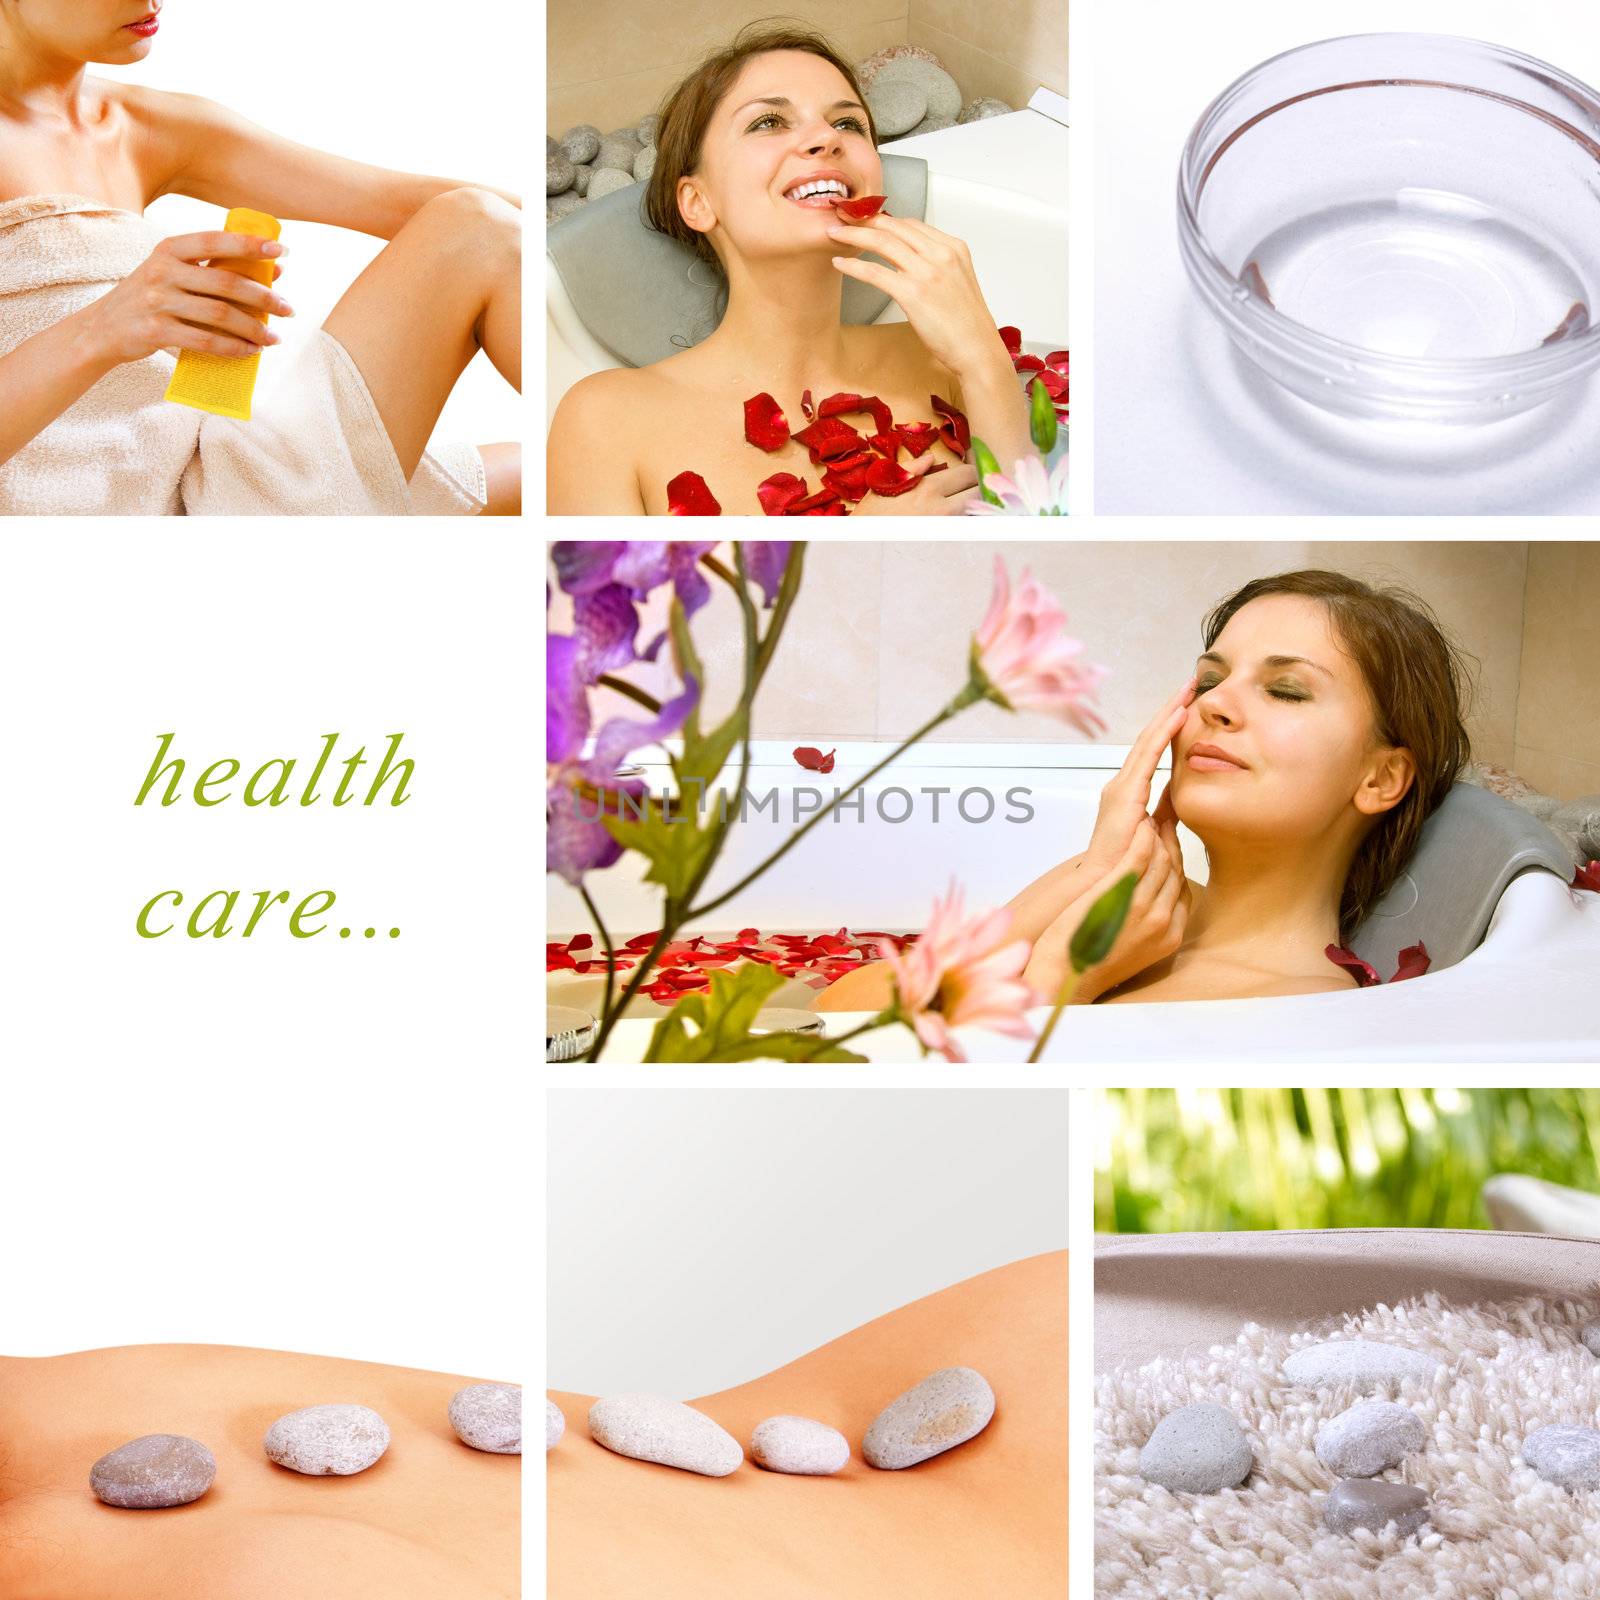 Spa Collage.Dayspa concept composed of different images